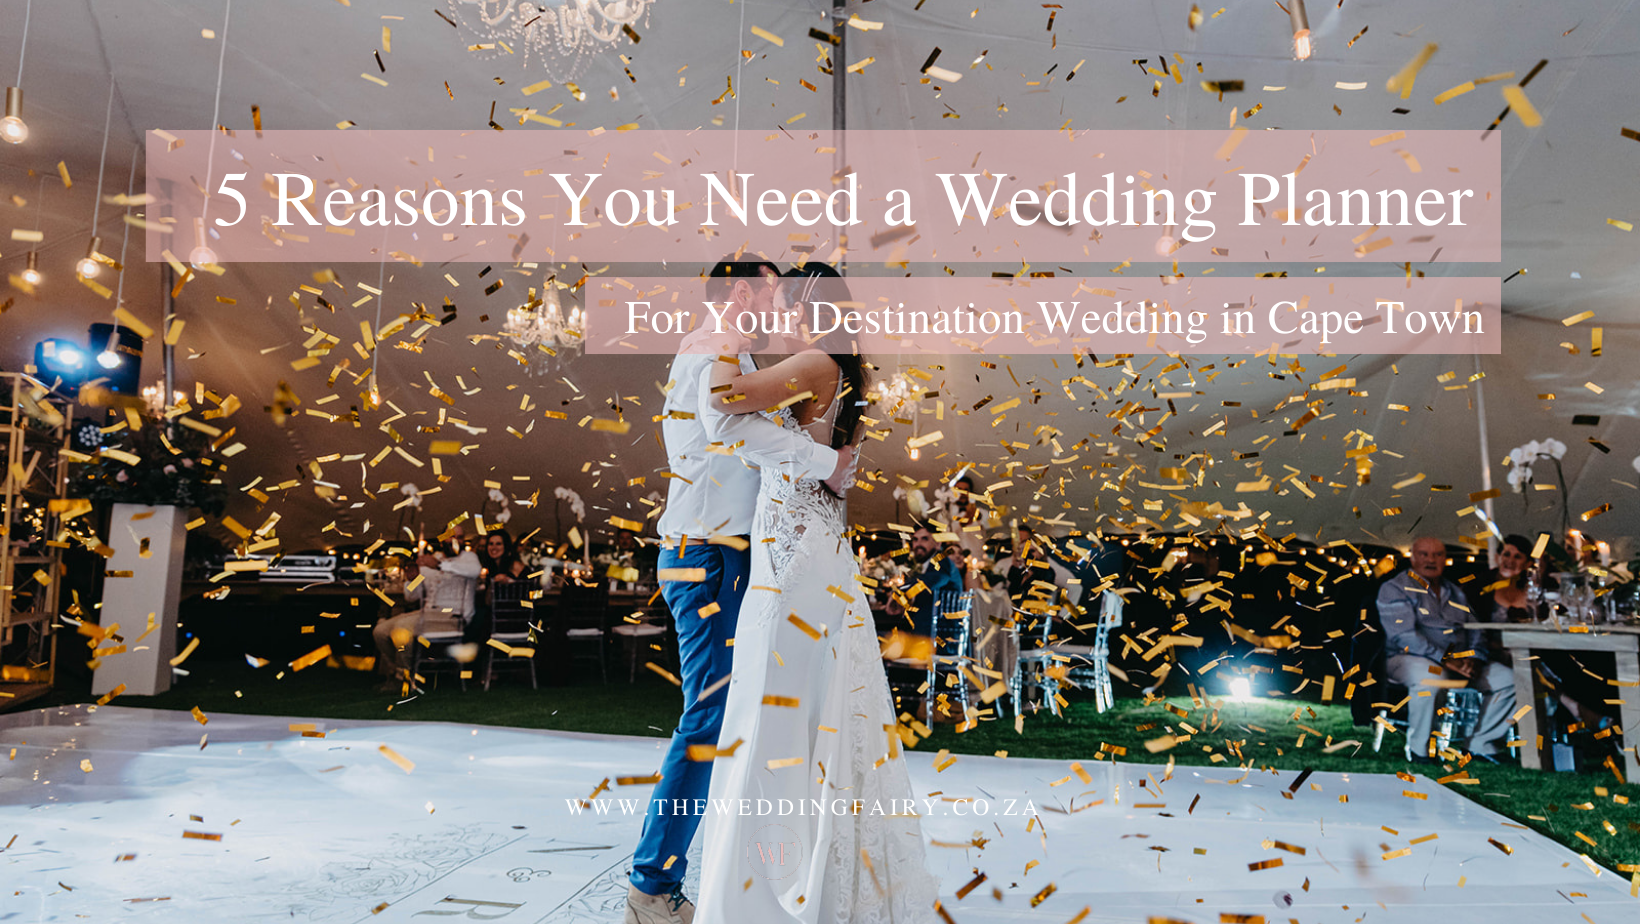 5 Reasons You Need a Destination Wedding Planner for Your Cape Town Wedding